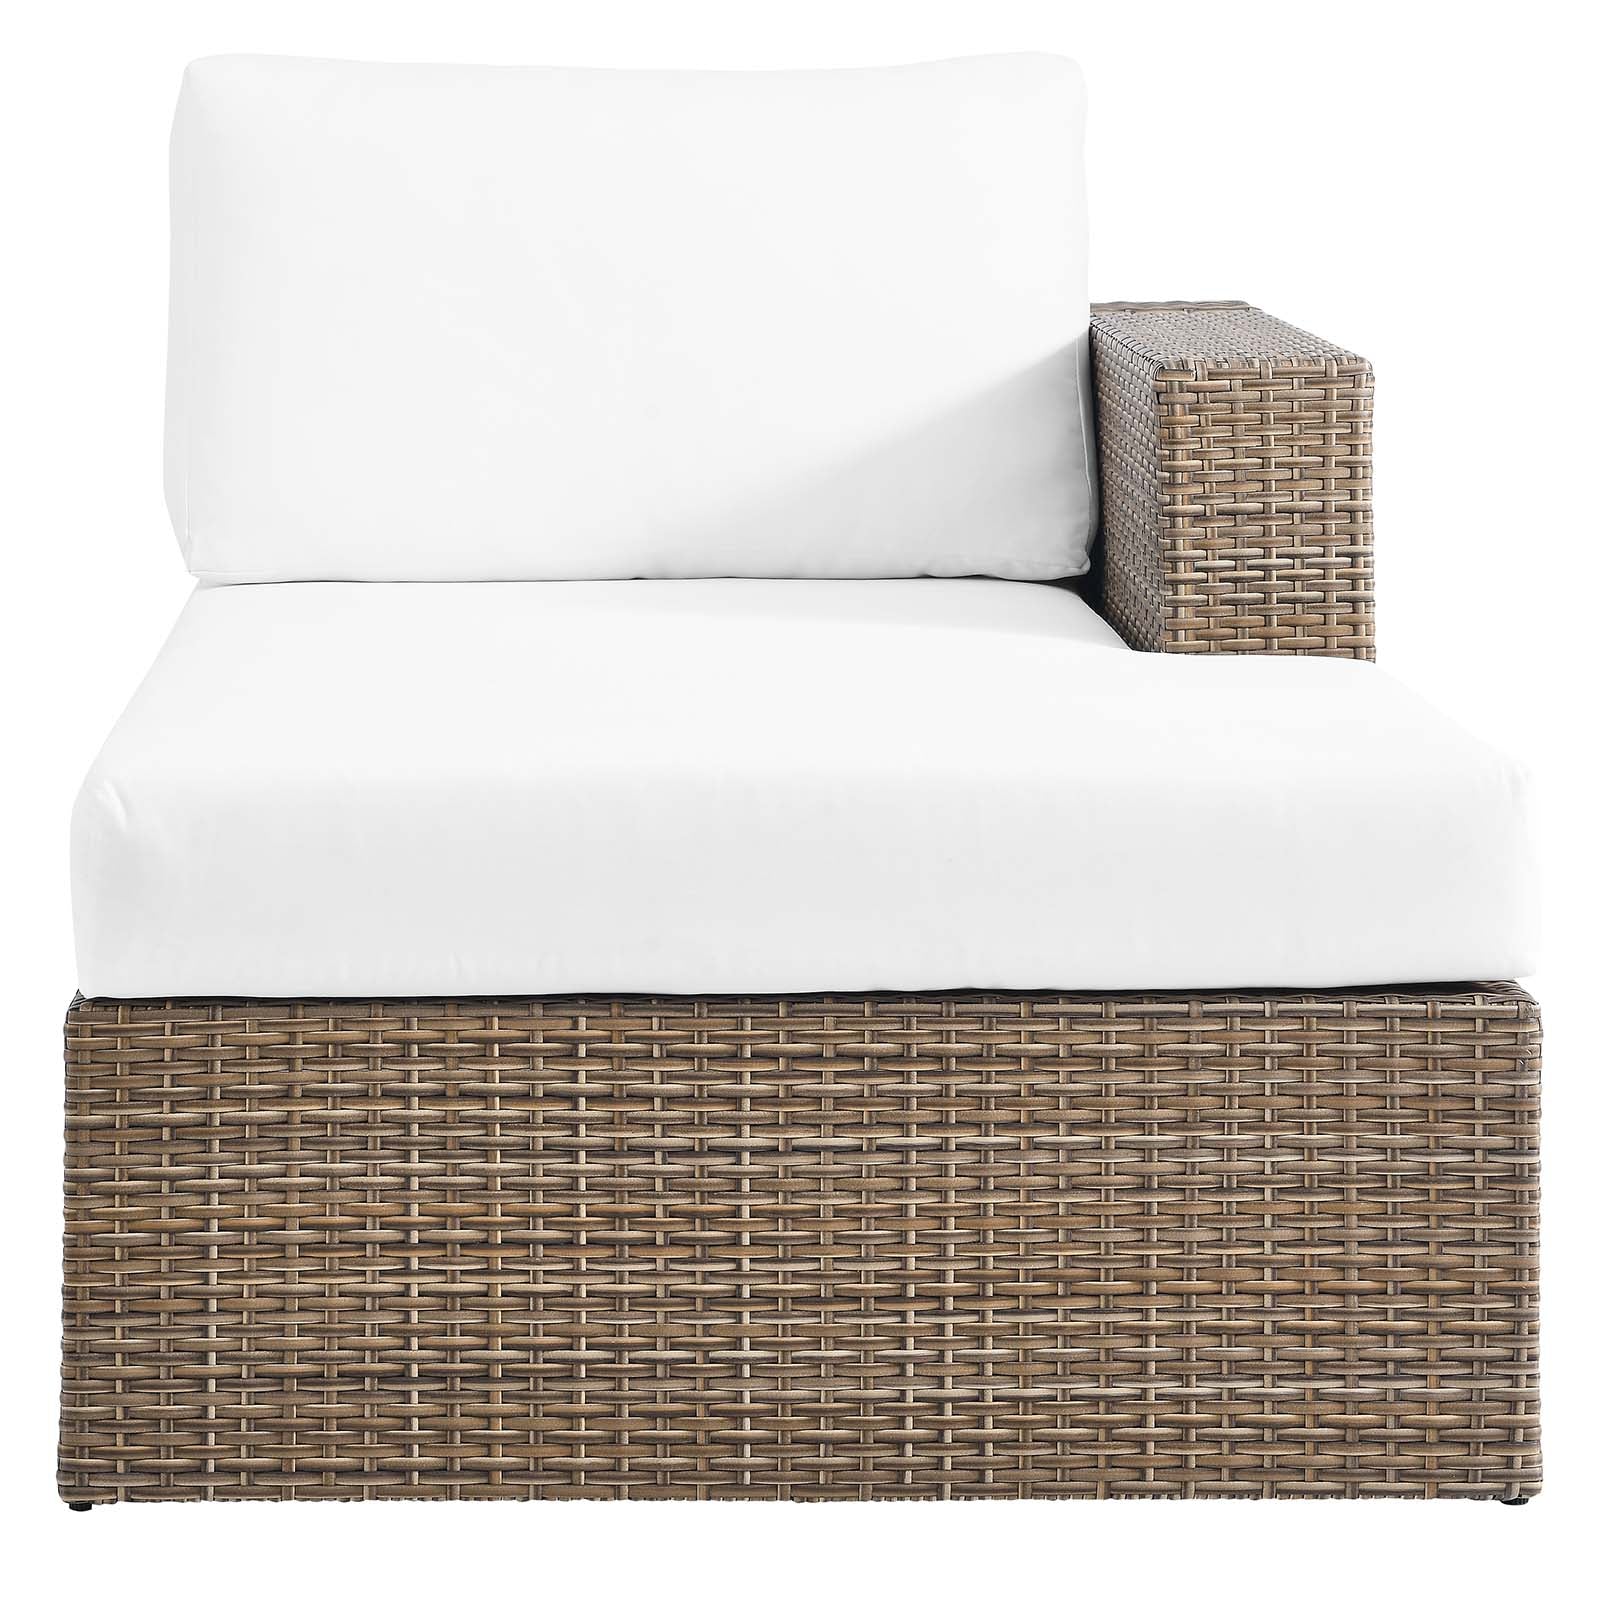 Convene Outdoor Patio Right-Arm Chaise-Outdoor Chaise-Modway-Wall2Wall Furnishings